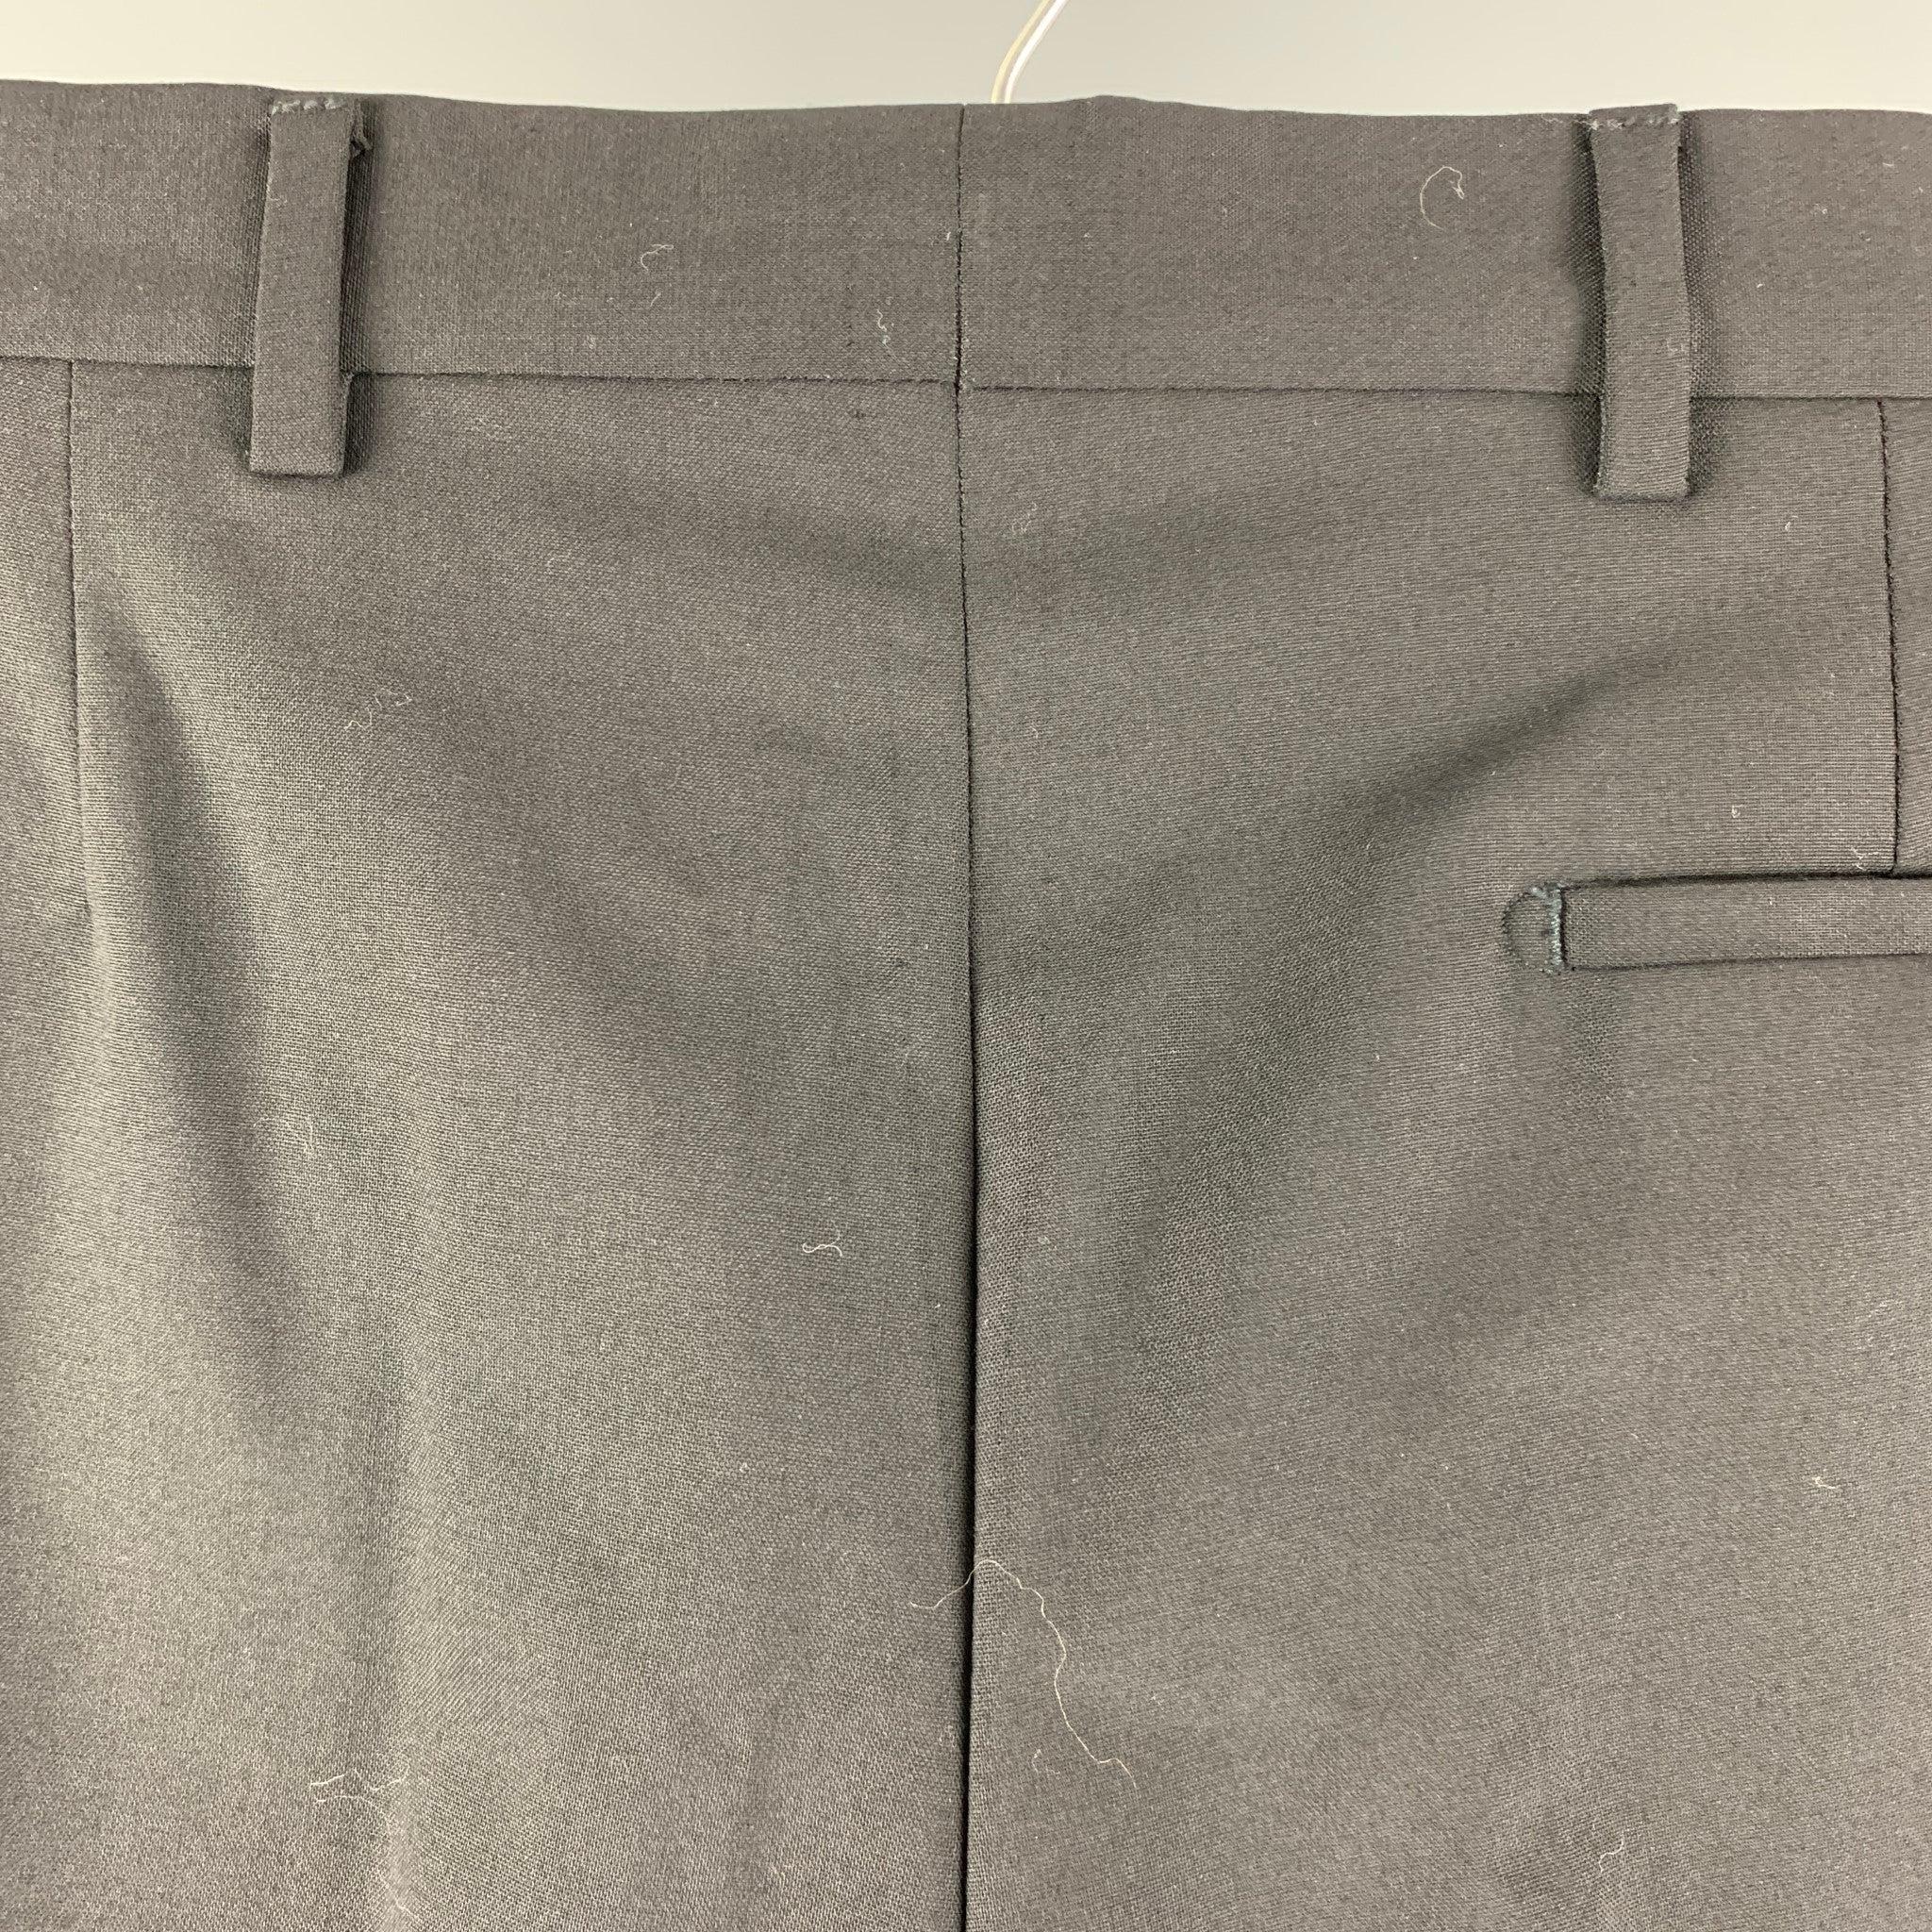 PRADA Size 30 Black Solid Wool Zip Fly Dress Pants In Good Condition For Sale In San Francisco, CA